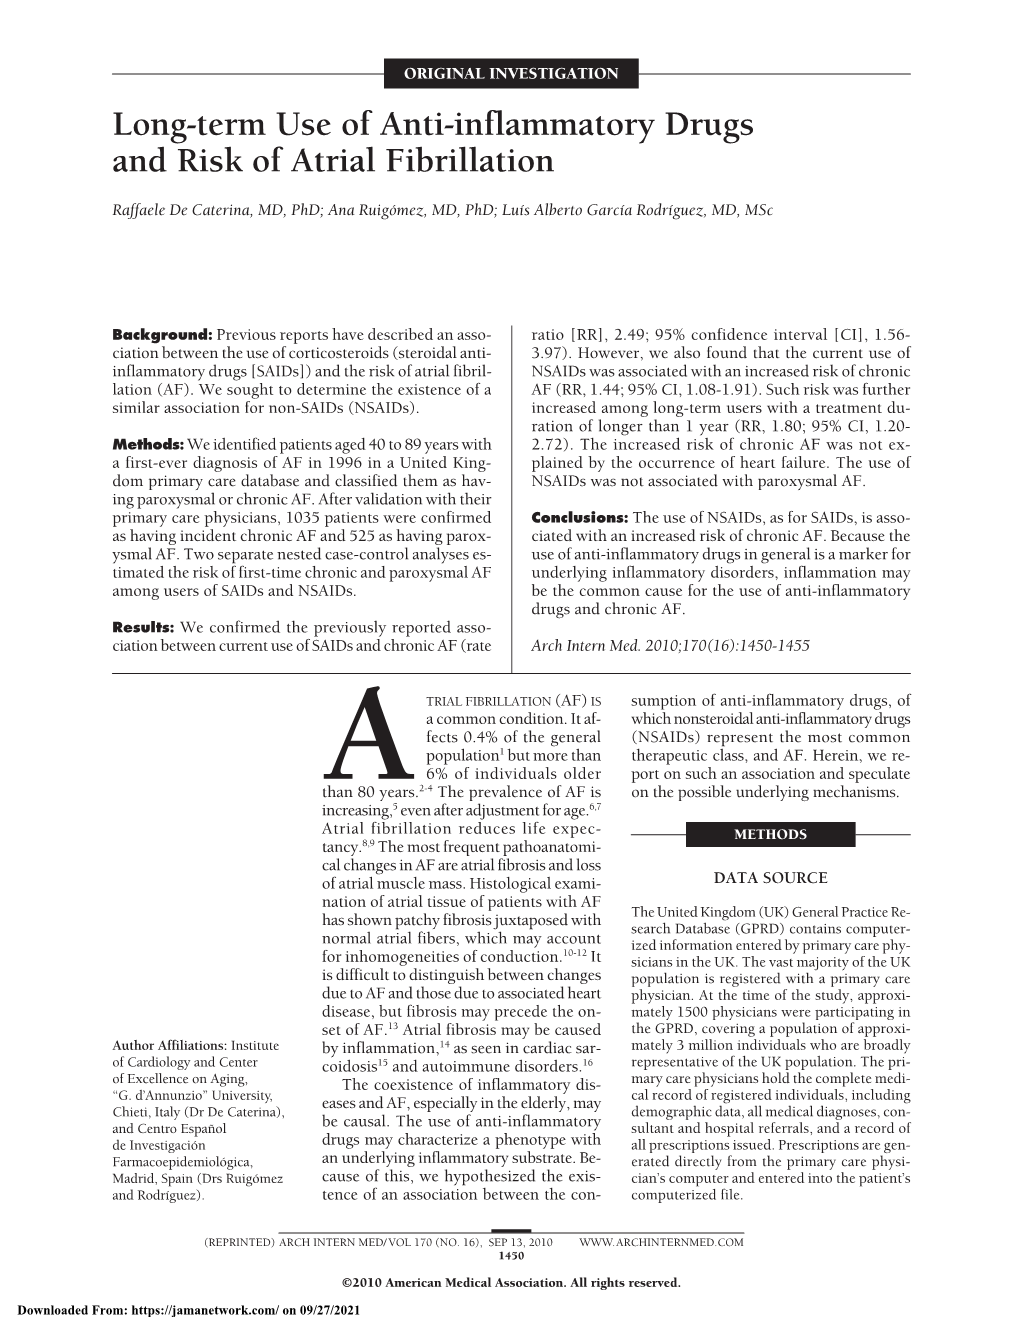 Long-Term Use of Anti-Inflammatory Drugs and Risk of Atrial Fibrillation